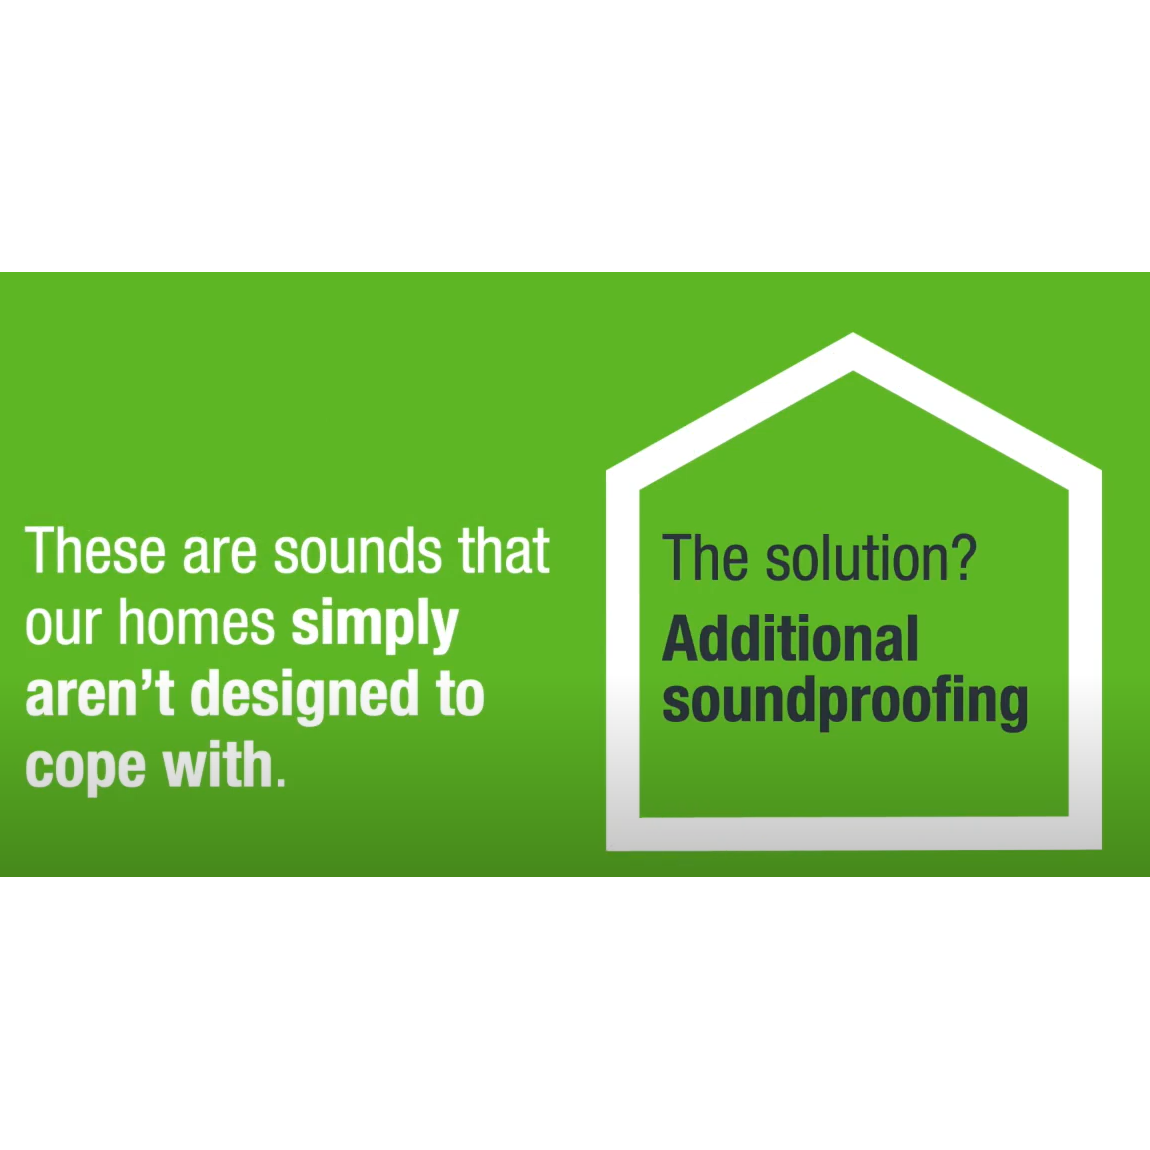 How to soundproof a floor in your home